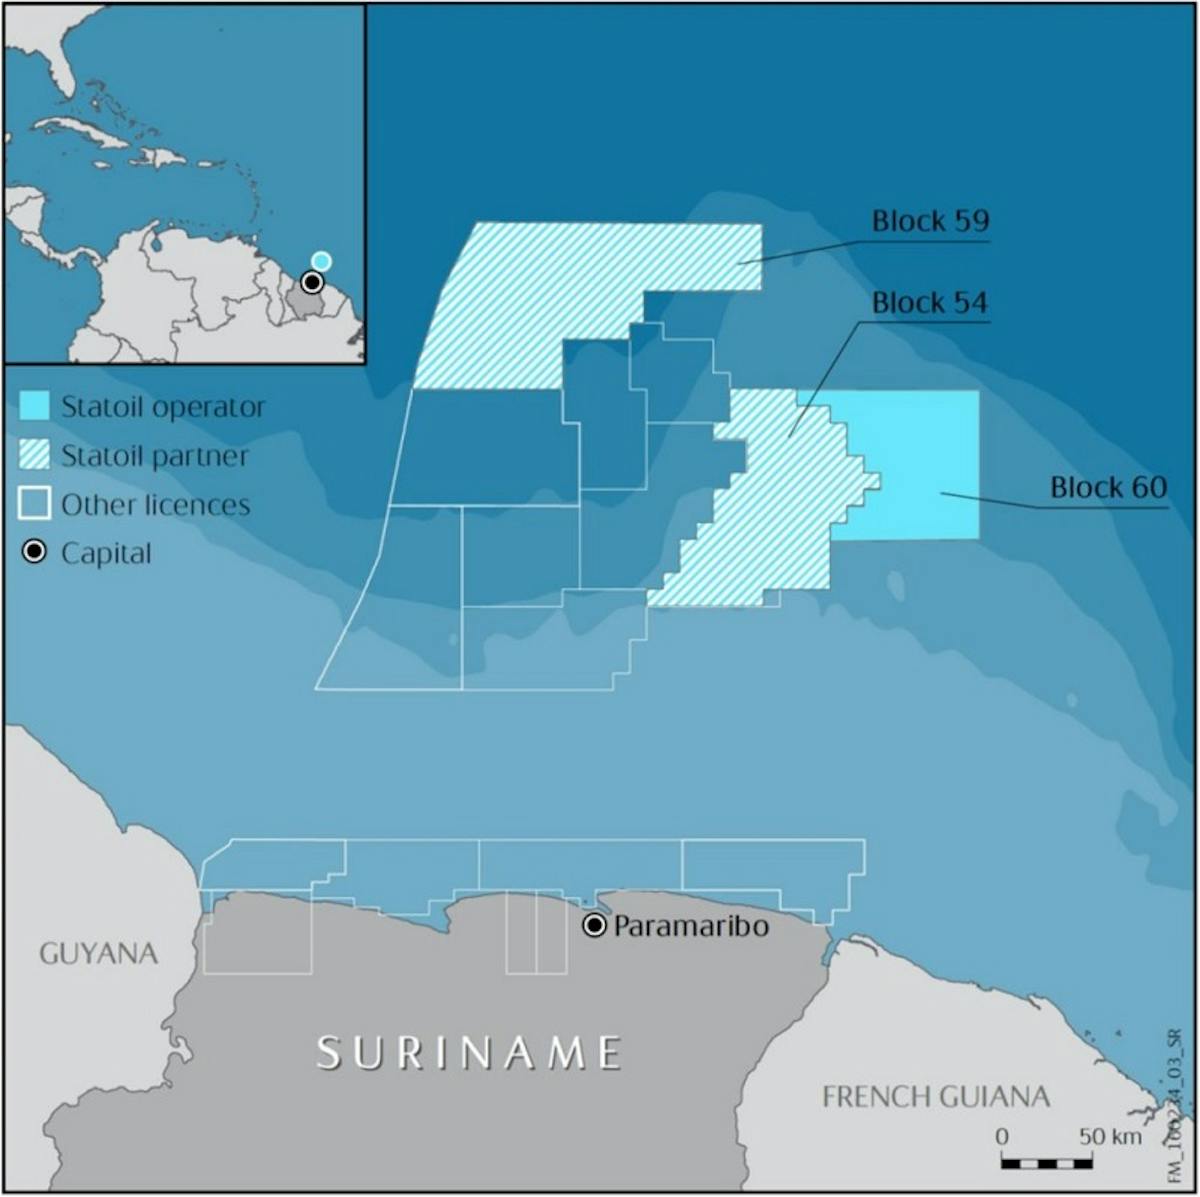 Blocks 59 and 60 offshore Suriname